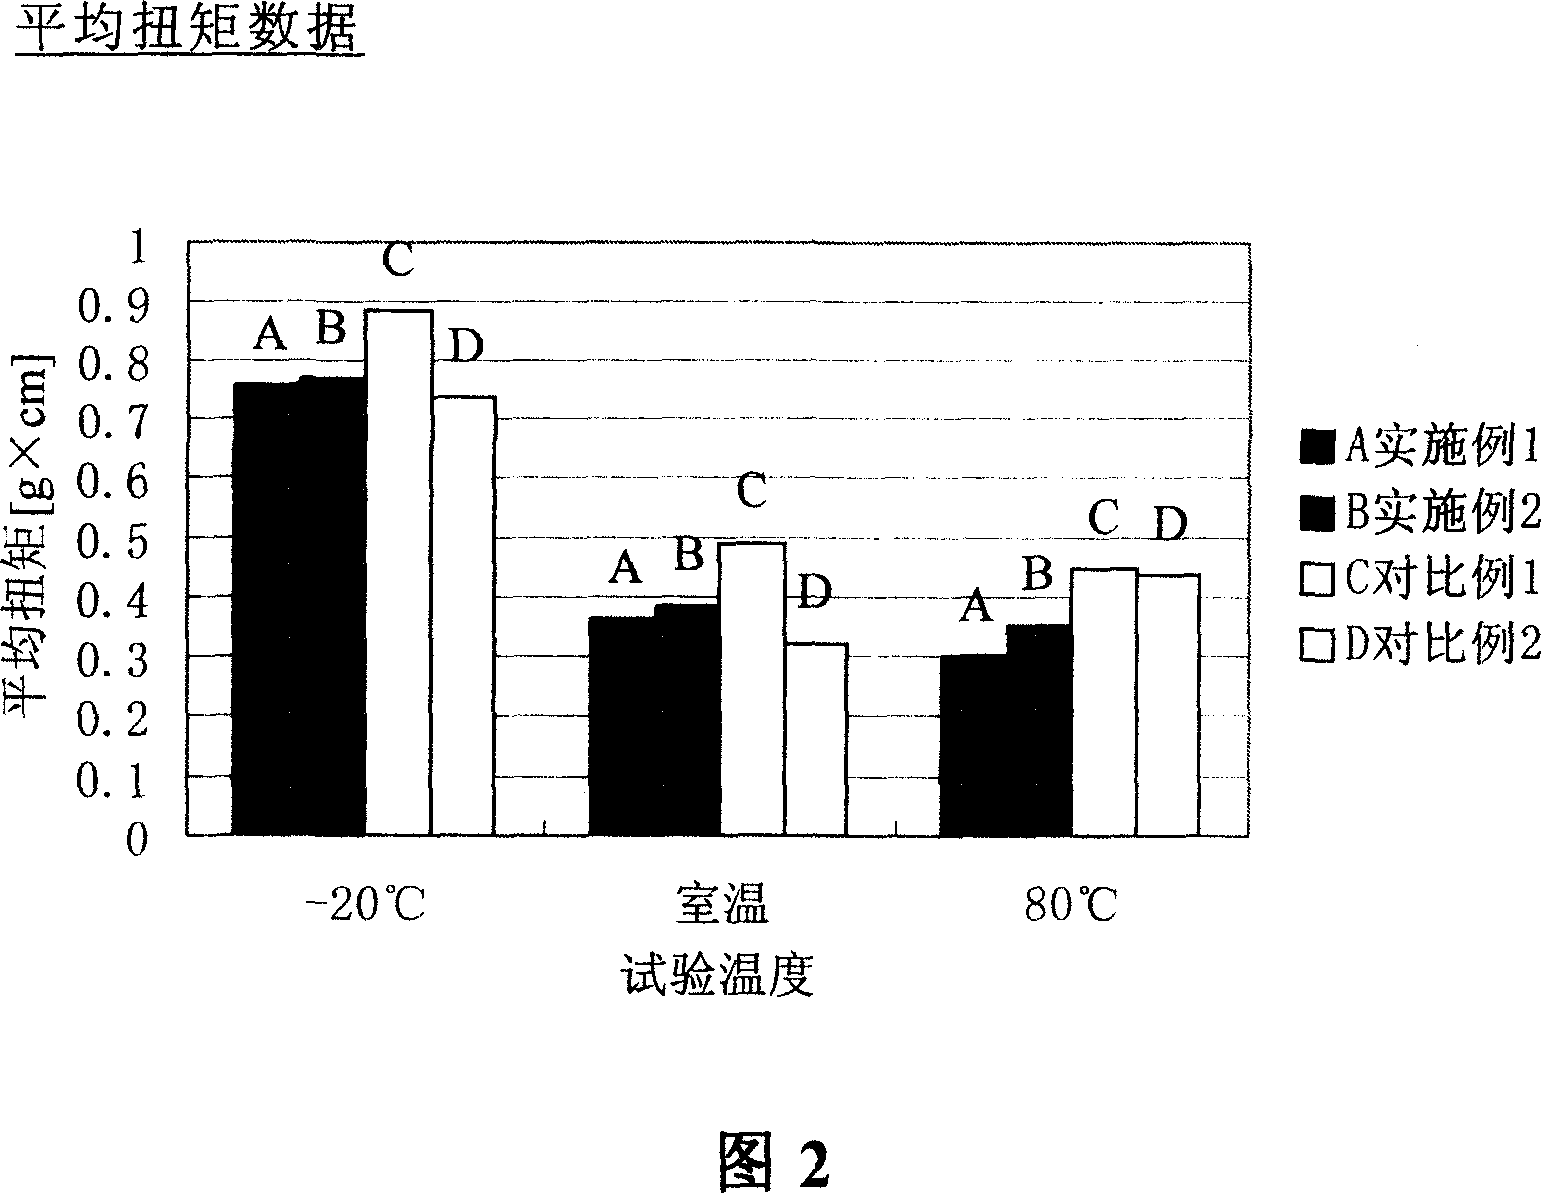 Grease composition for pivot assembly bearing and bearing for pivot assembly